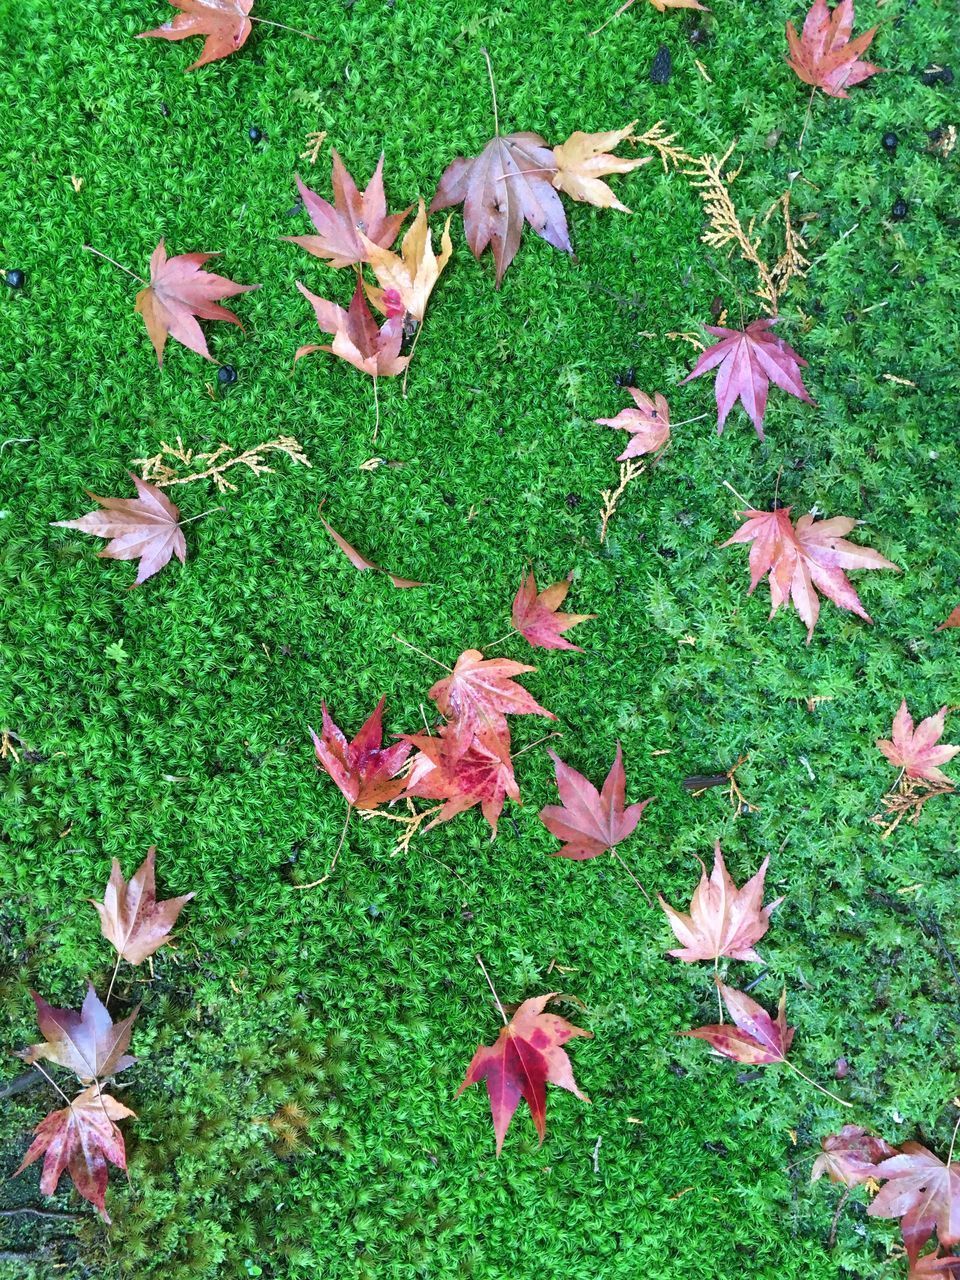 HIGH ANGLE VIEW OF FALLEN LEAVES ON GRASS